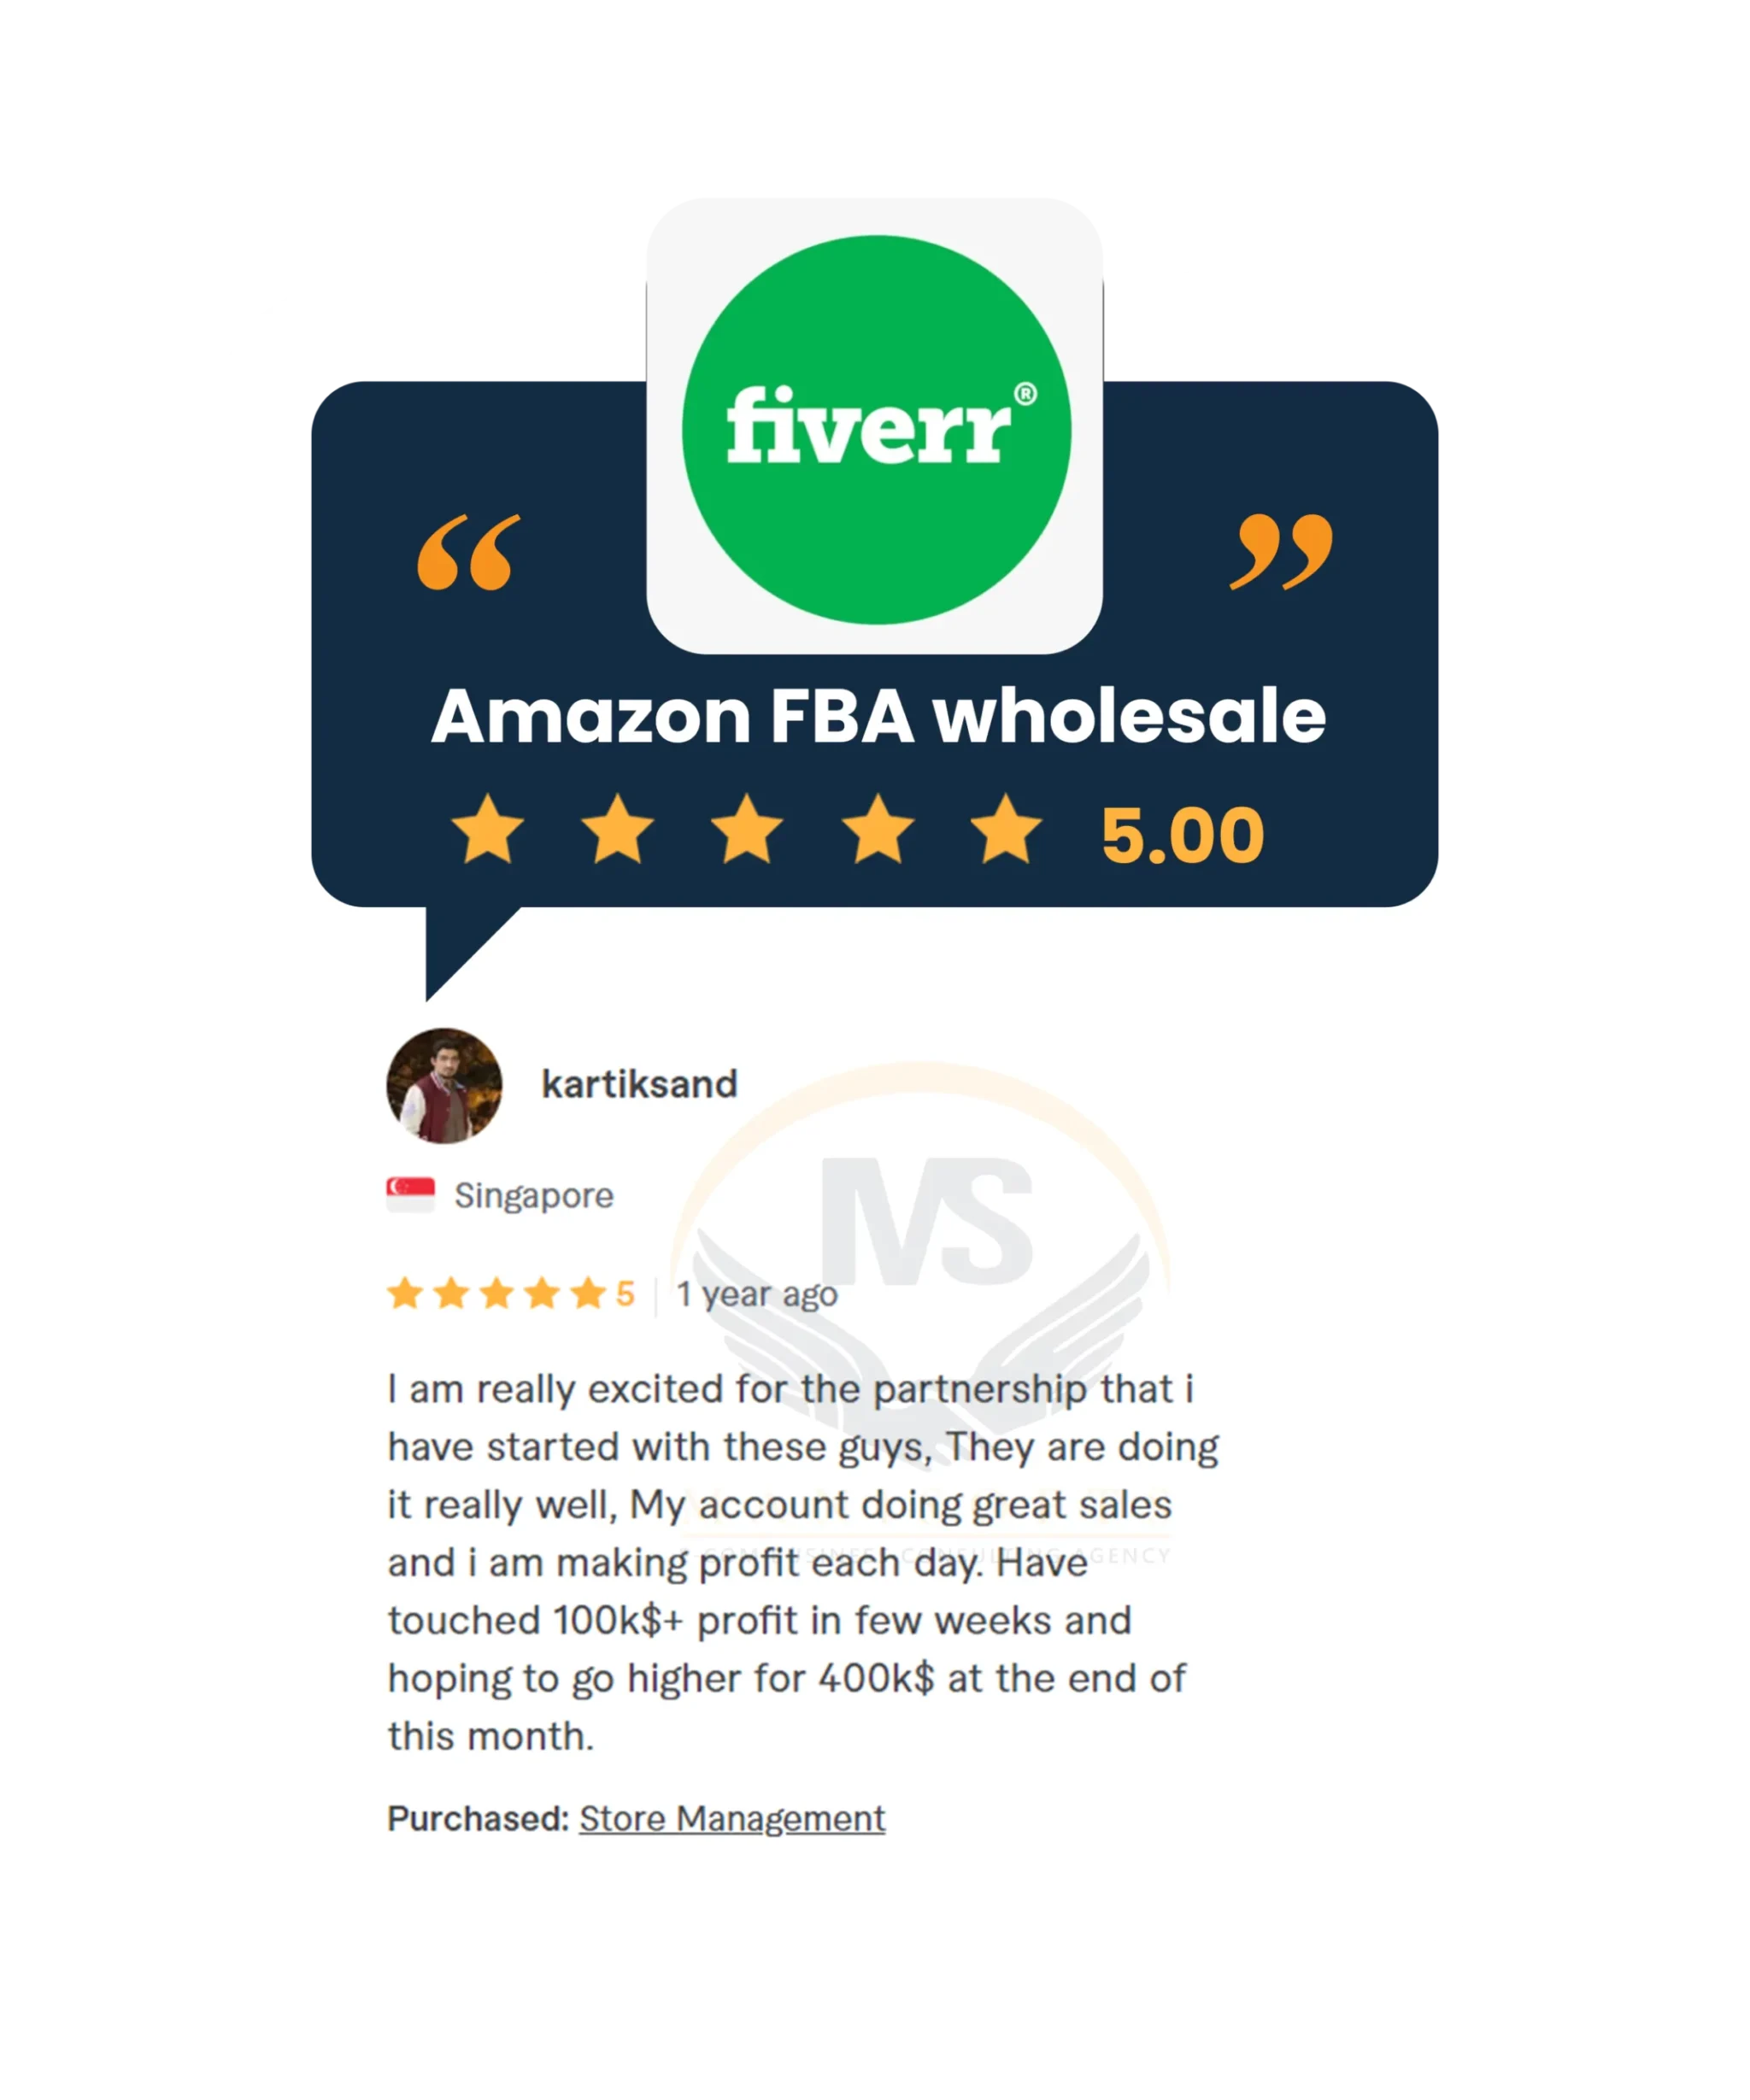 Fiverr review for manisofts